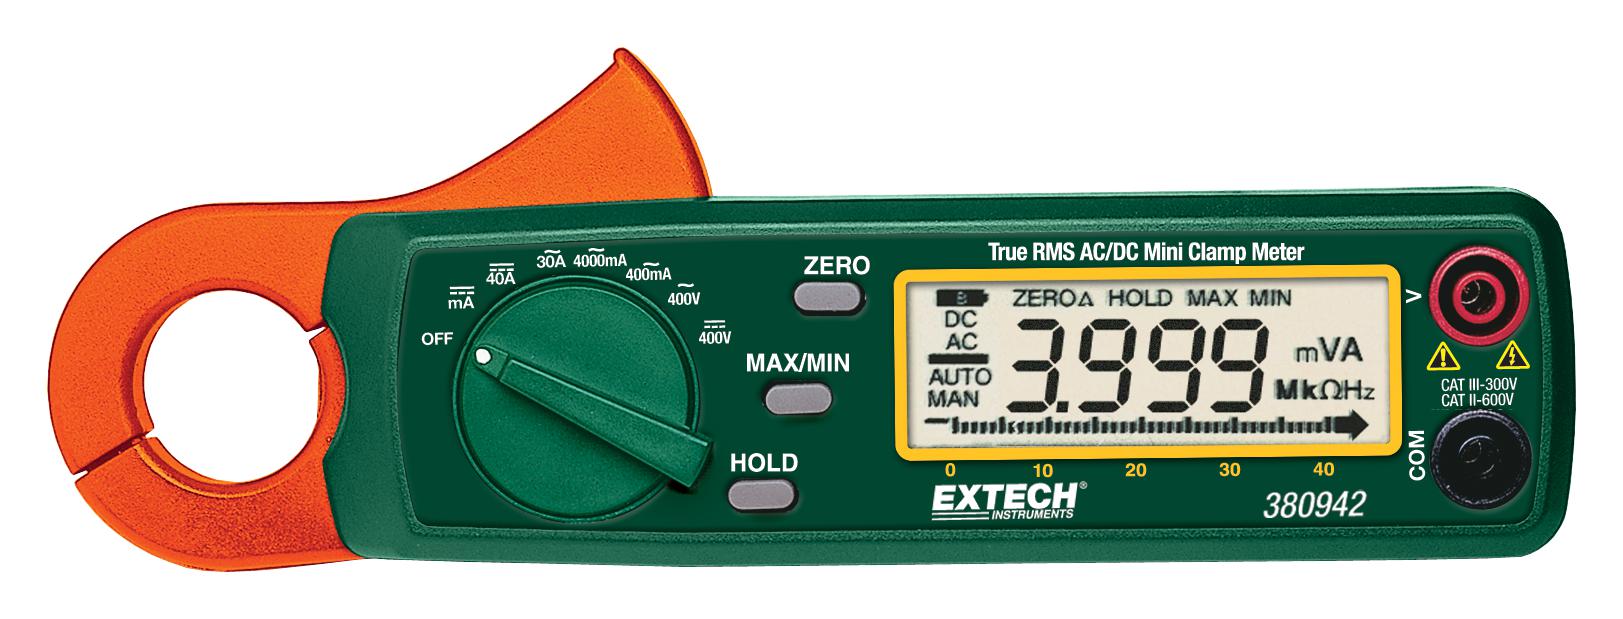 380942 MINI CLAMP METER, TRUE RMS, 30A, 23MM EXTECH INSTRUMENTS